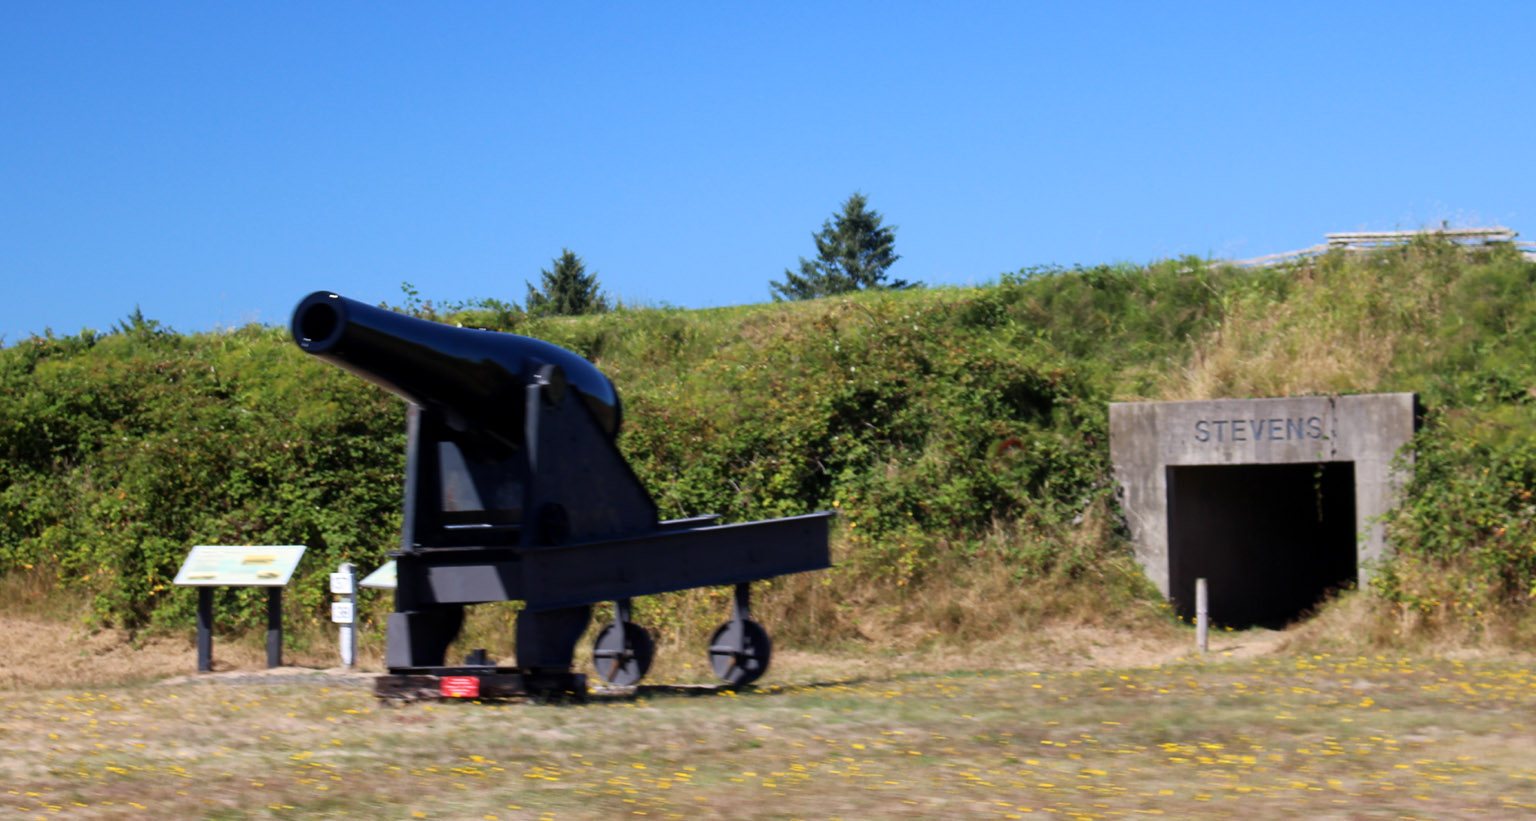 Fort Stevens Historical Site | Travels With Cookie